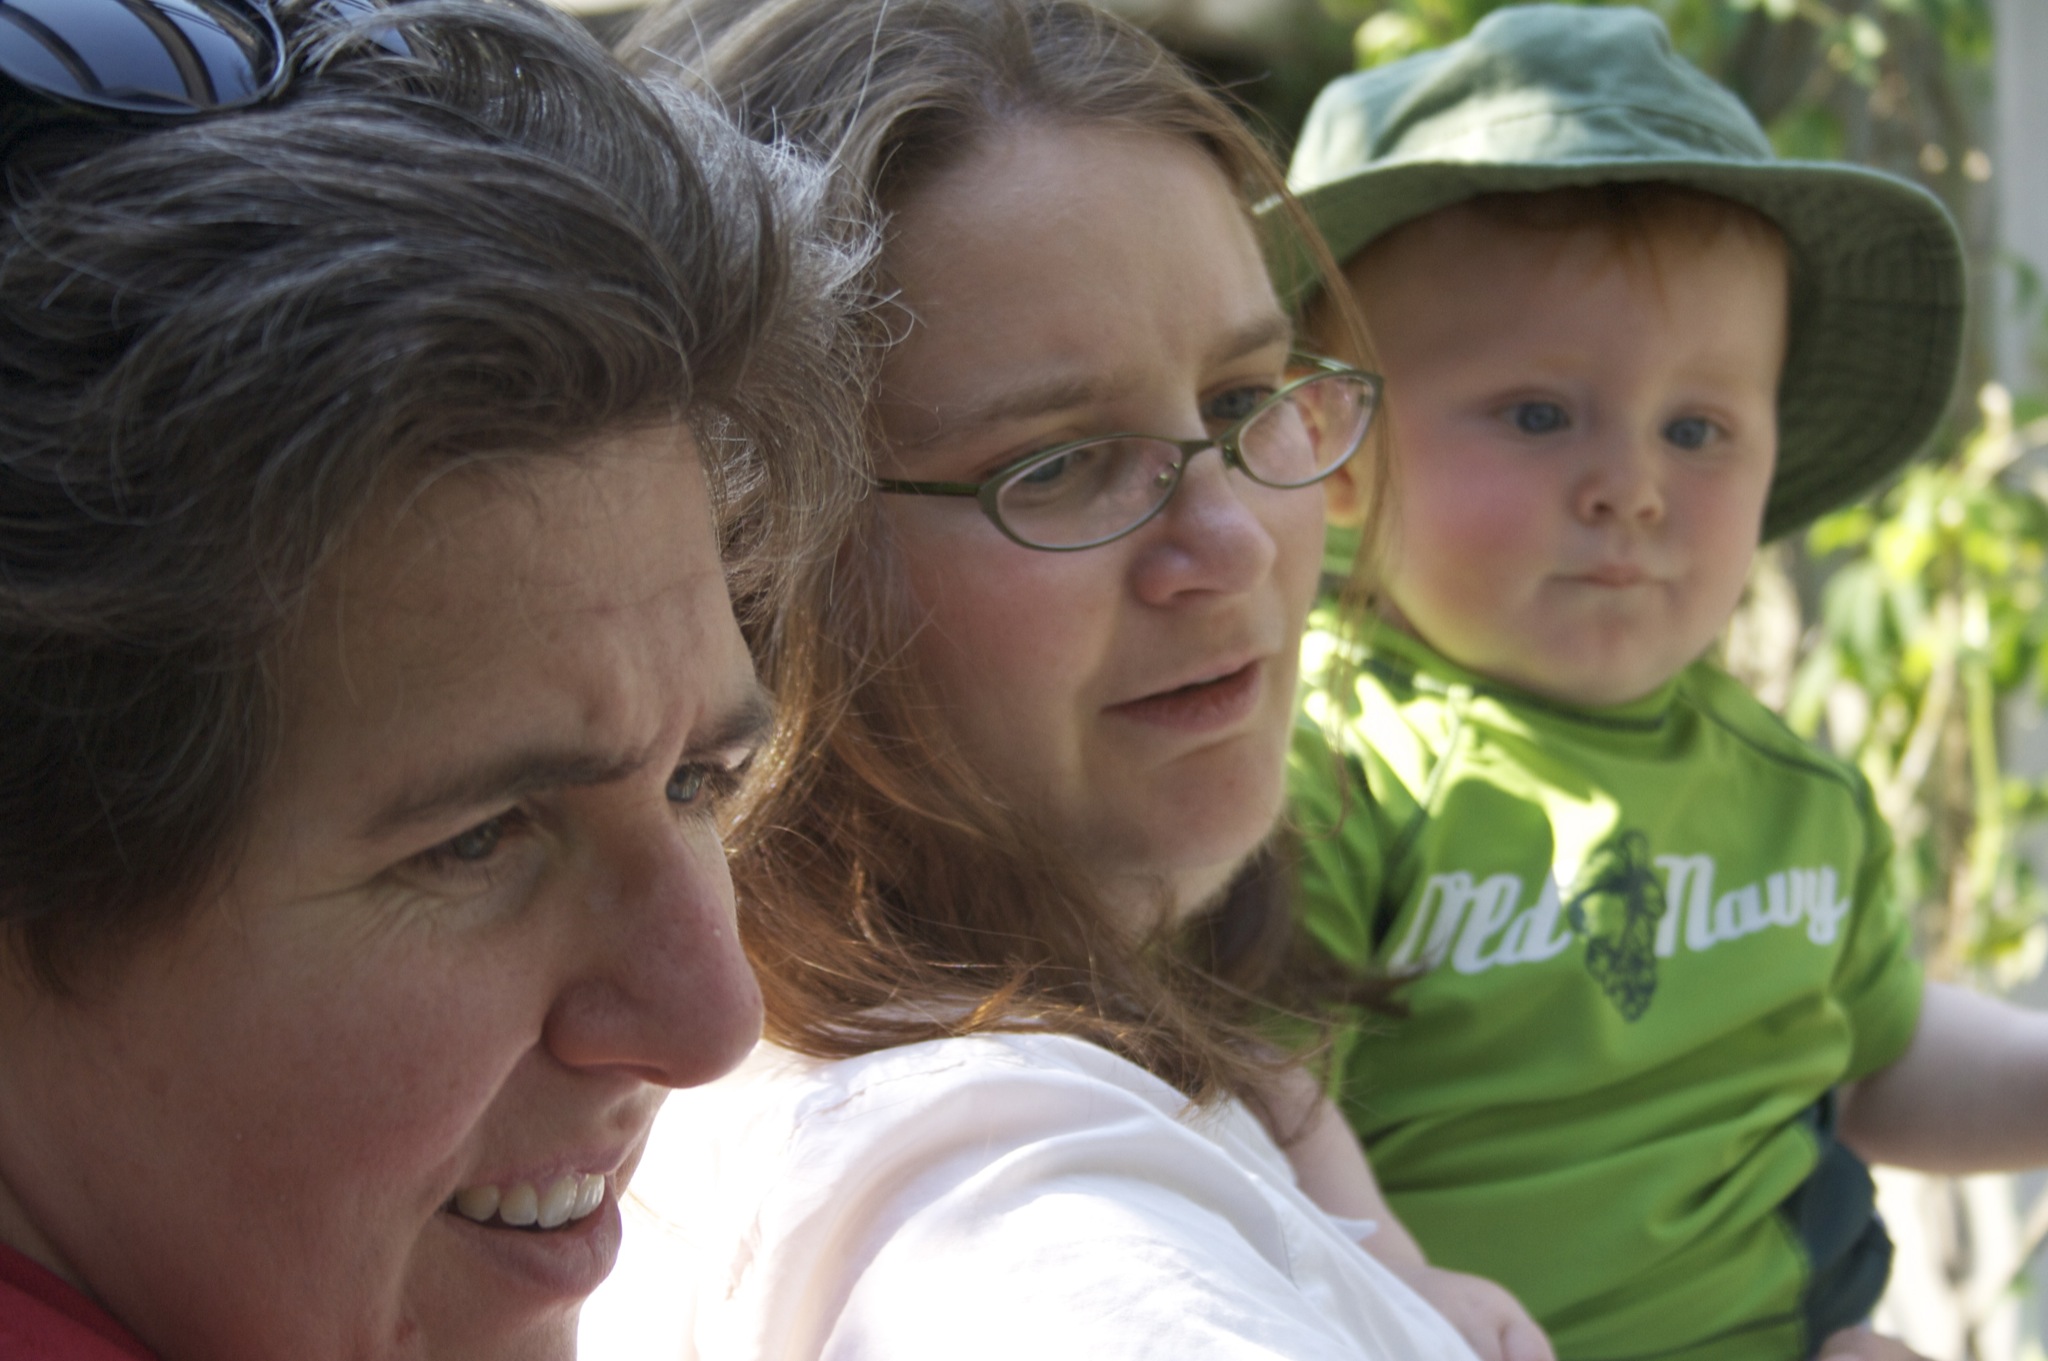 three adults and one child wearing green shirts